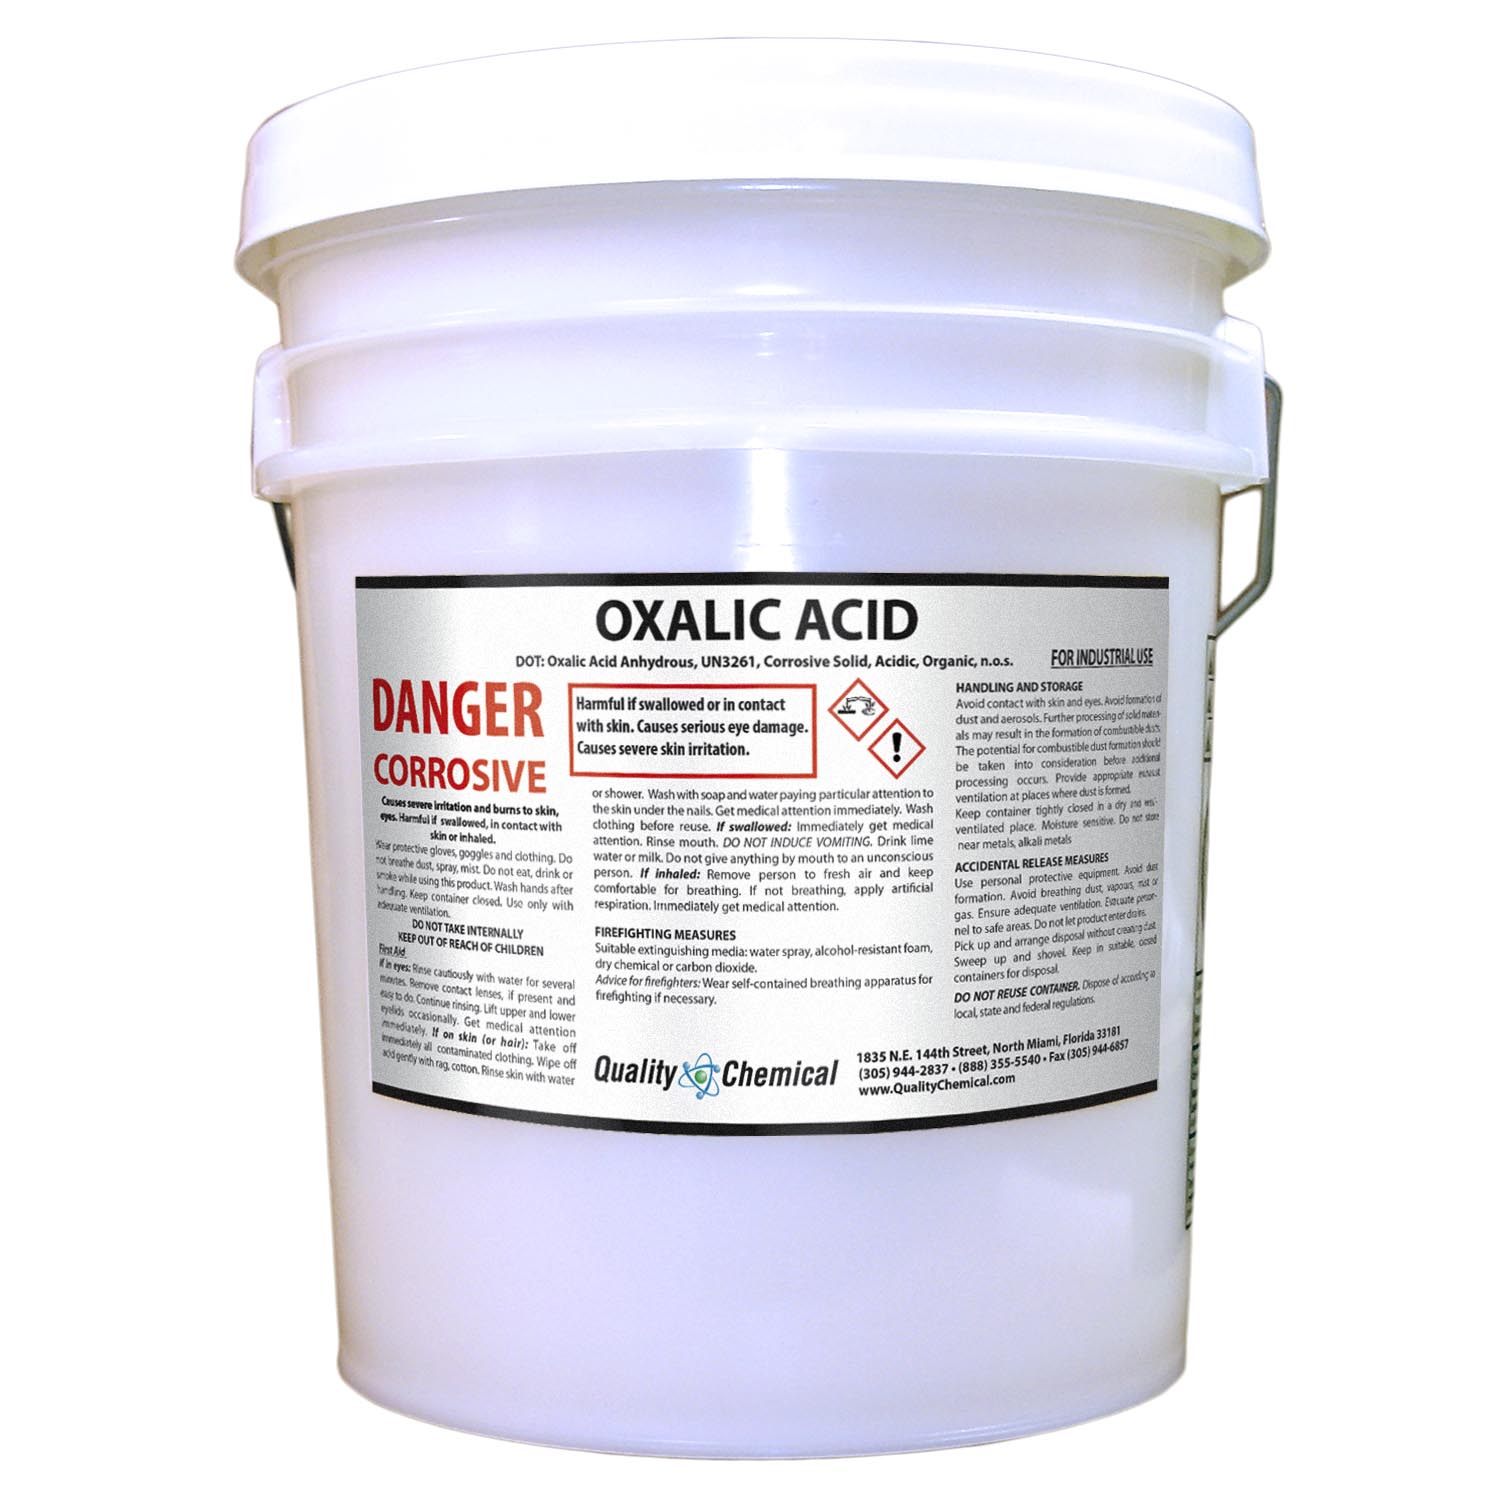 https://www.qualitychemical.com/shared/images/products/ChemicalsNEW/QCC_RW_Oxalic_acid_5g.jpg